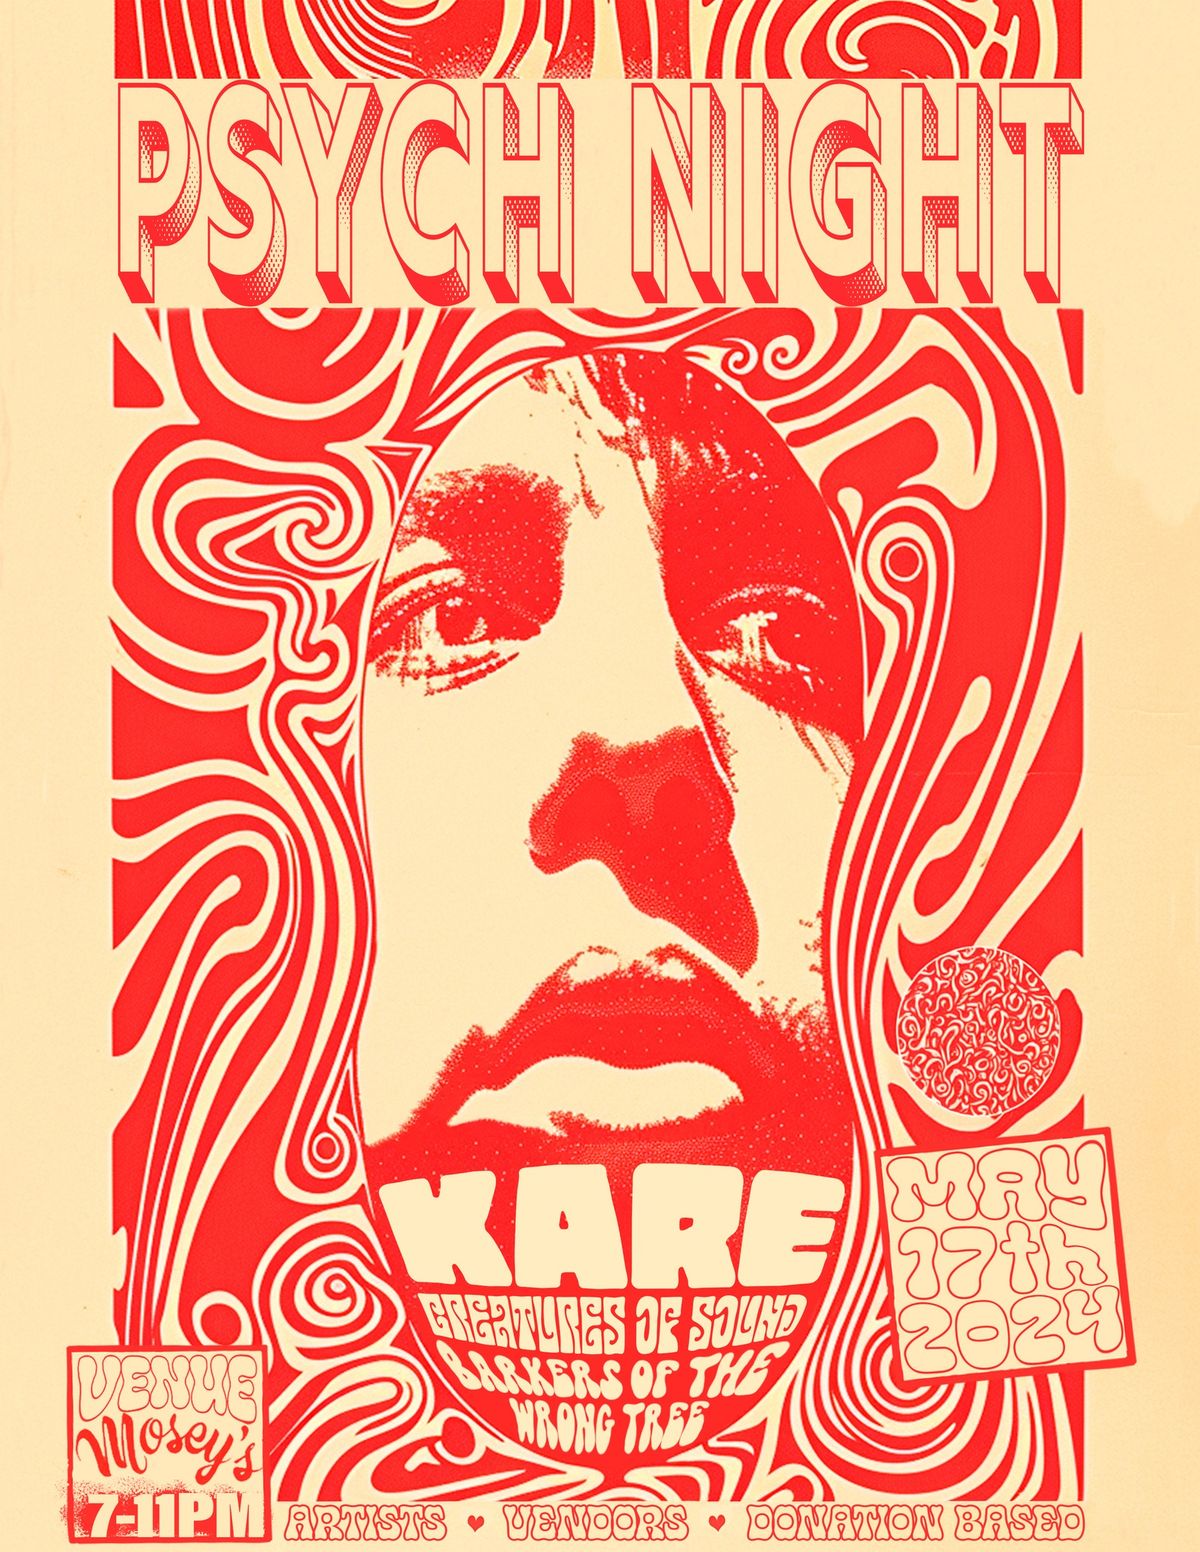 Psych Night! *5-17-24* Ft. Kare, Barkers of the Wrong Tree, Creatures of Sound